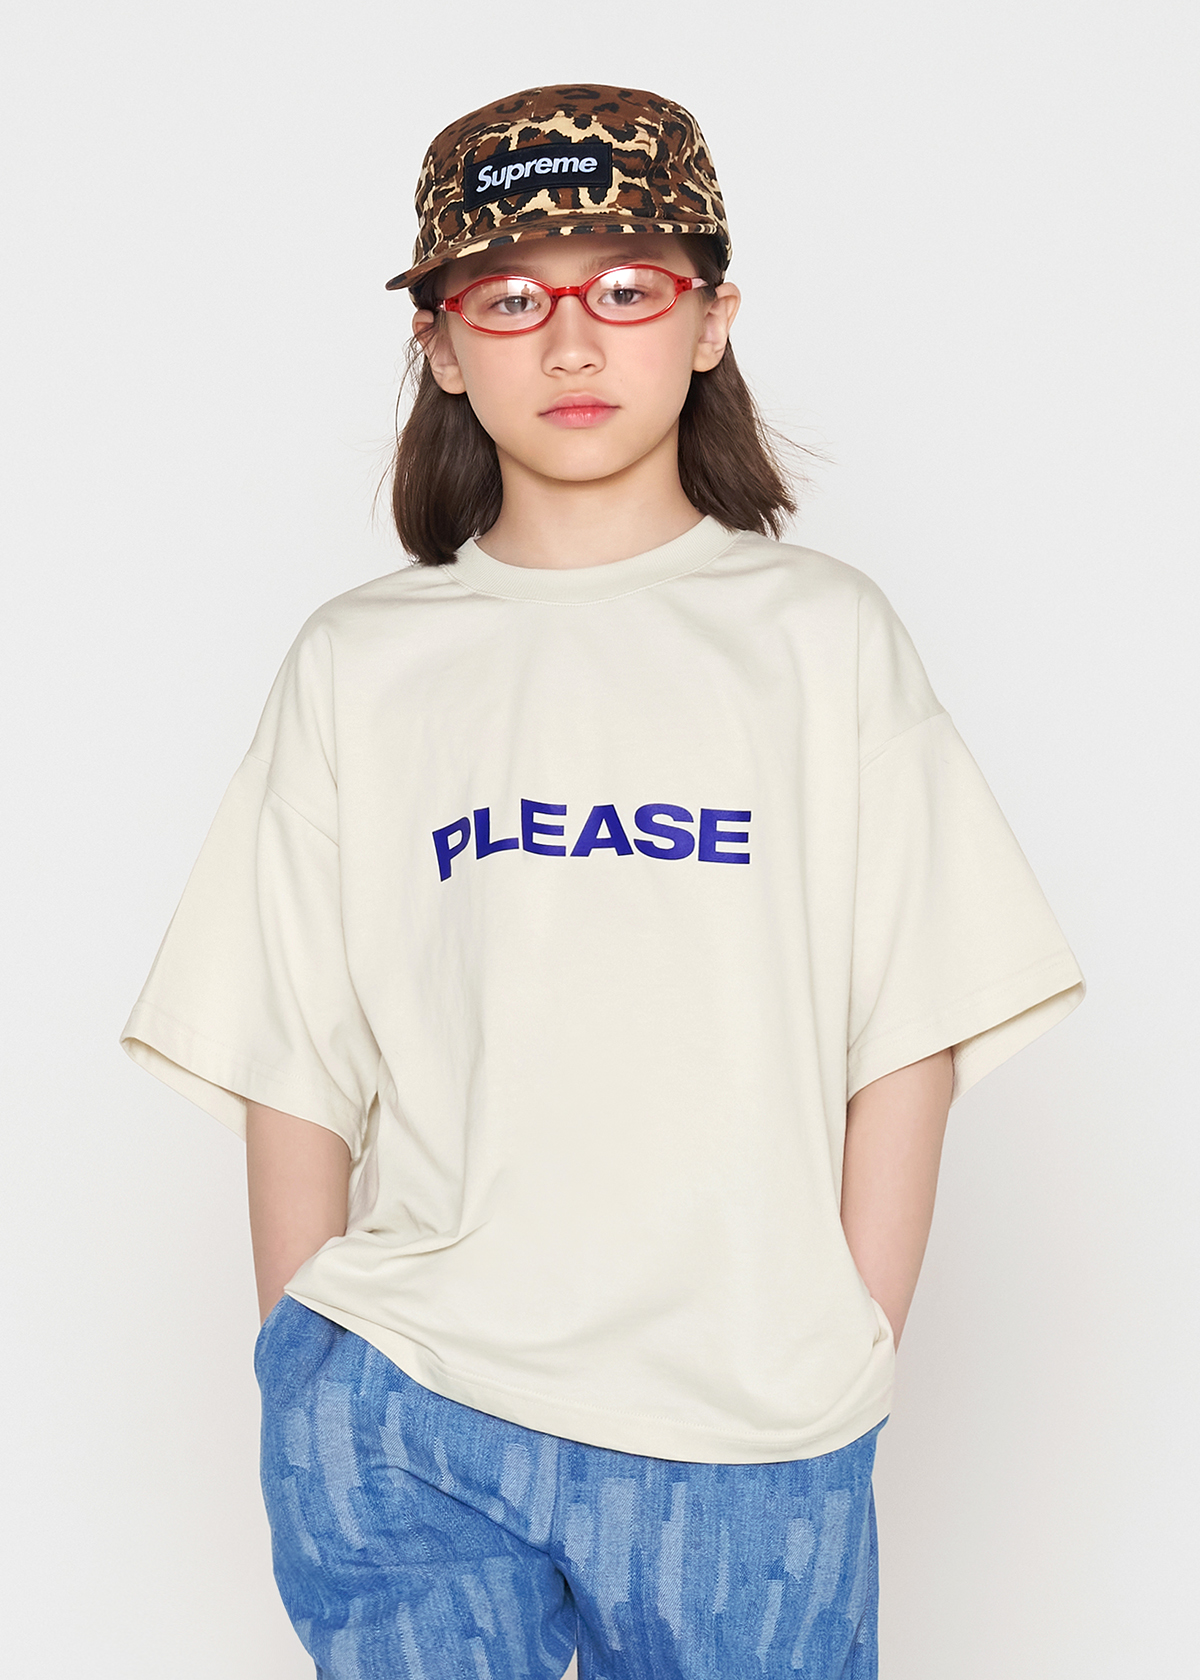 PLEASE SAY YES T-SHIRT